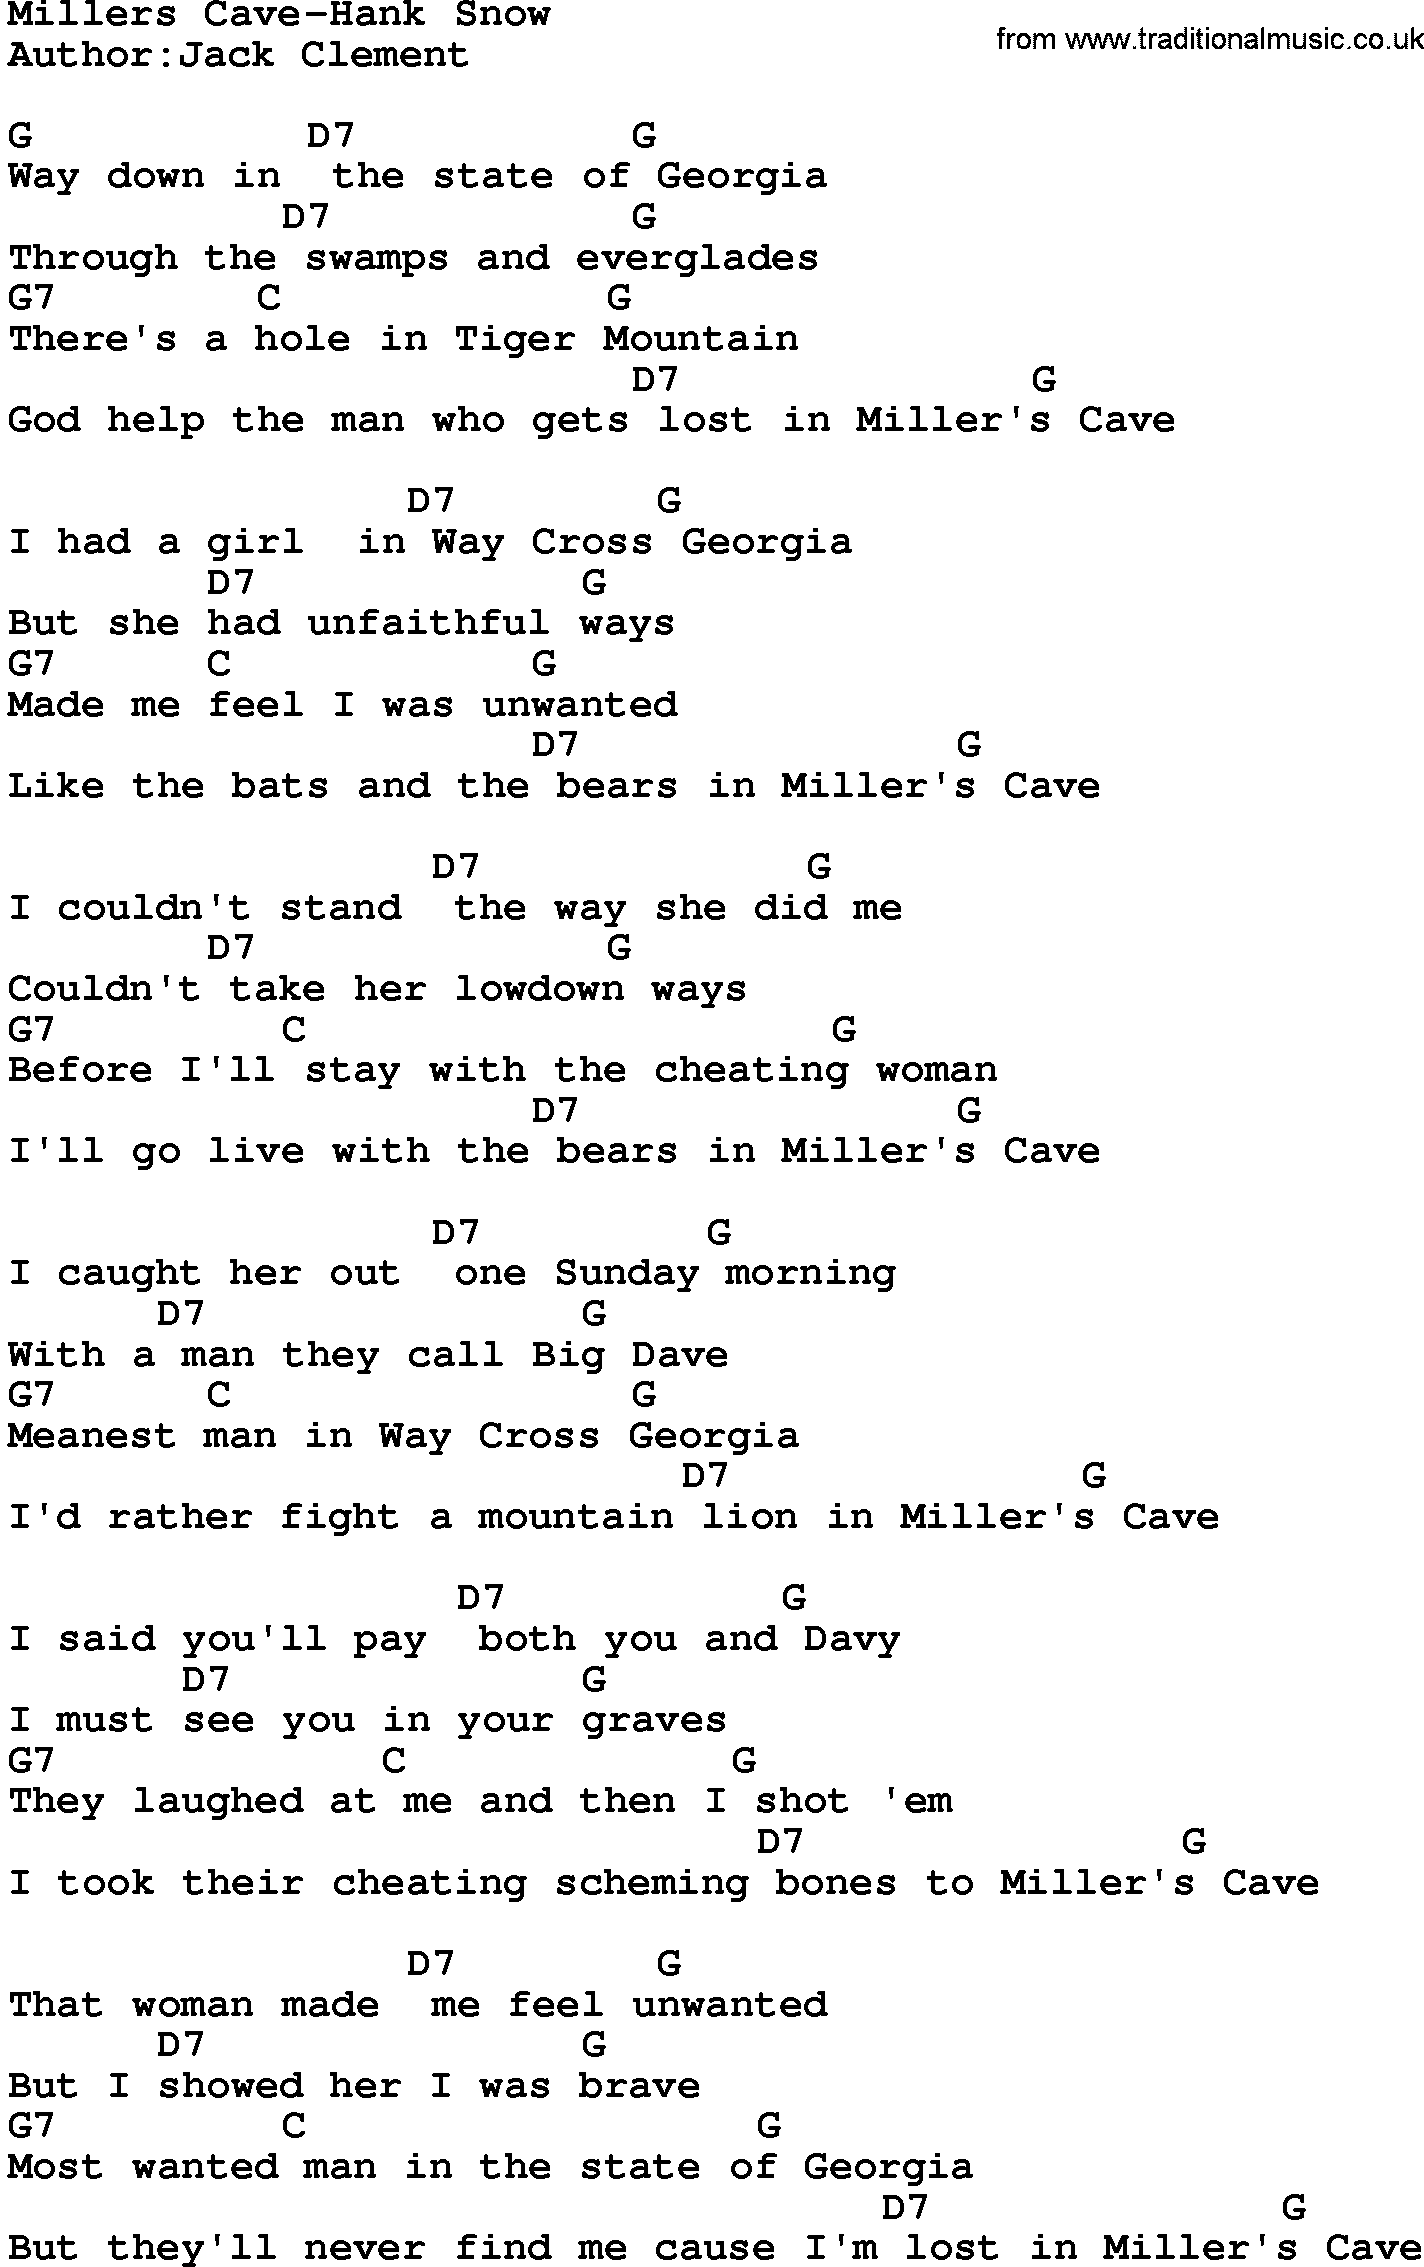 Country music song: Millers Cave-Hank Snow lyrics and chords